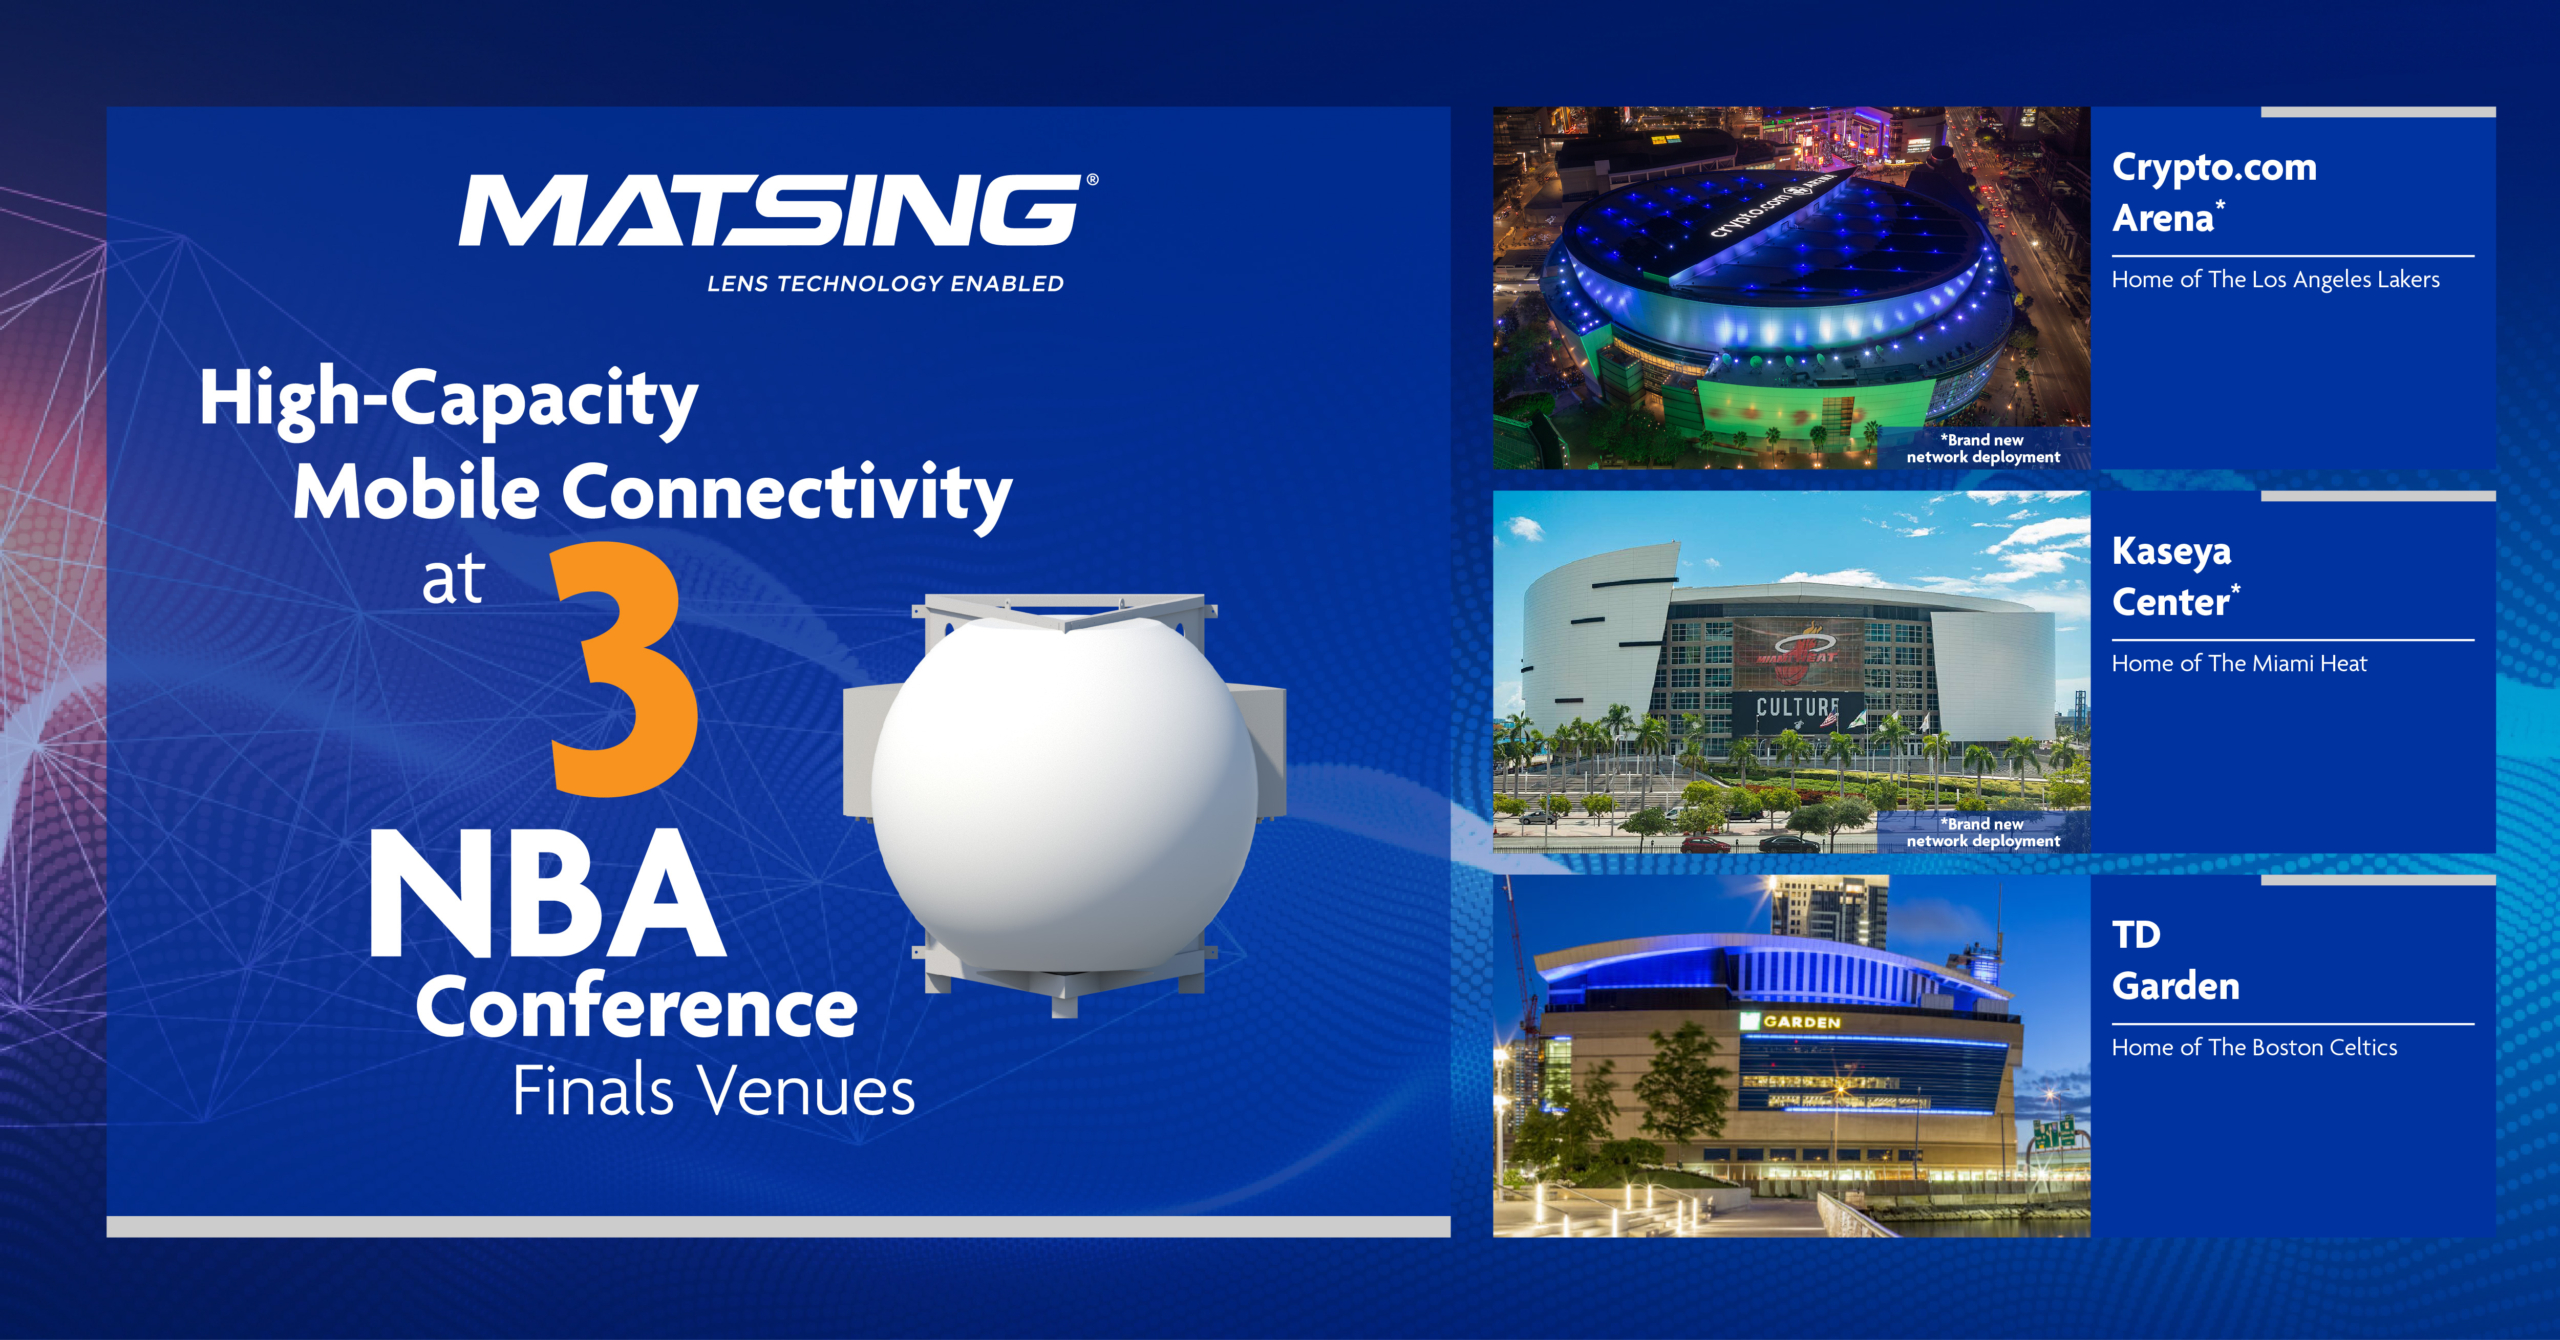 MatSing Delivers High-Capacity Mobile Connectivity at 3 NBA Conference Finals Venues